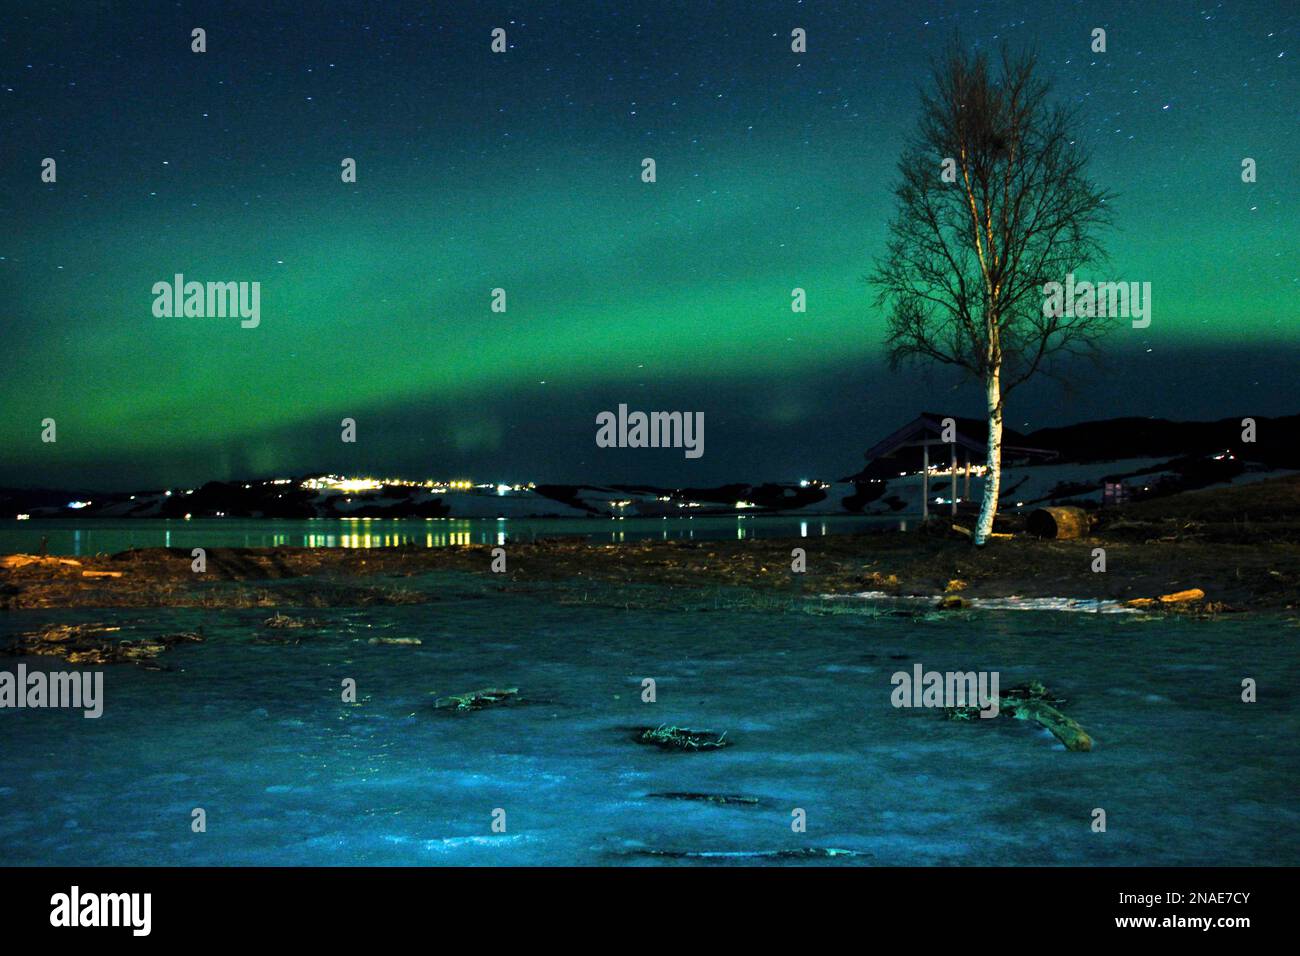 The aurora borealis, or Northern Lights, are seen near the city of Trondheim,  Norway Tuesday Jan. 23, 2012. Stargazers were out in force in northern  Europe on Tuesday, hoping to be awed